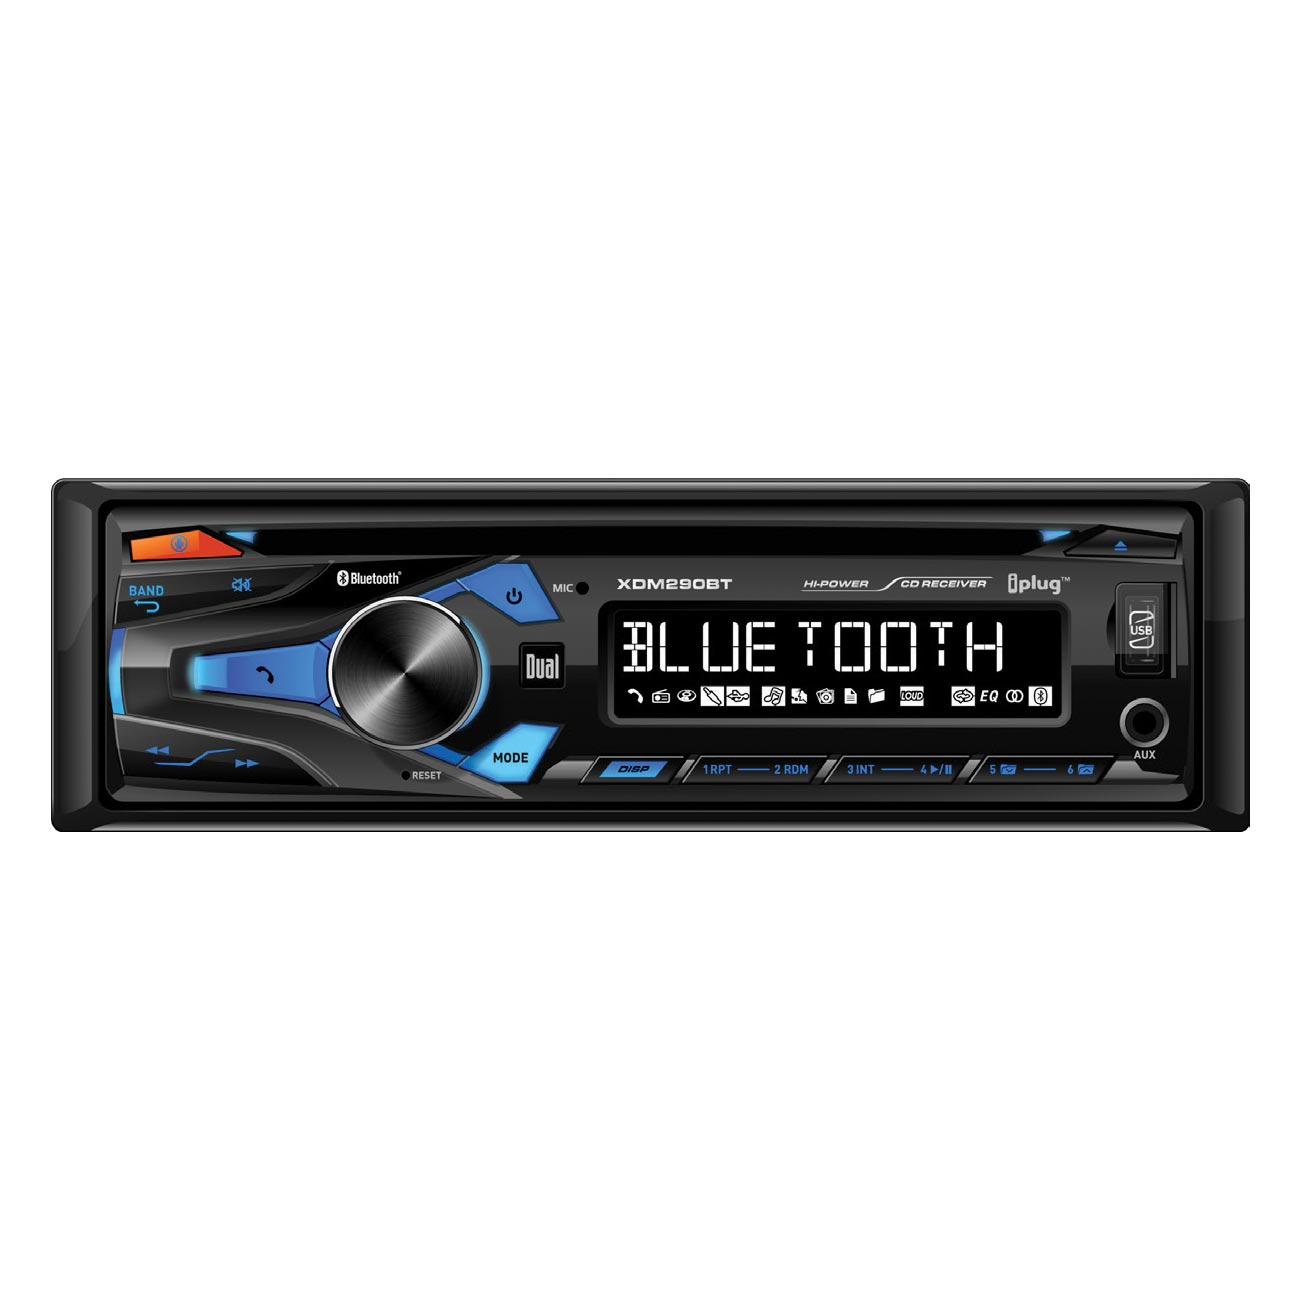 Dual Single Din AM/FM CD Player with Bluetooth USB Aux In 200 Watts Max